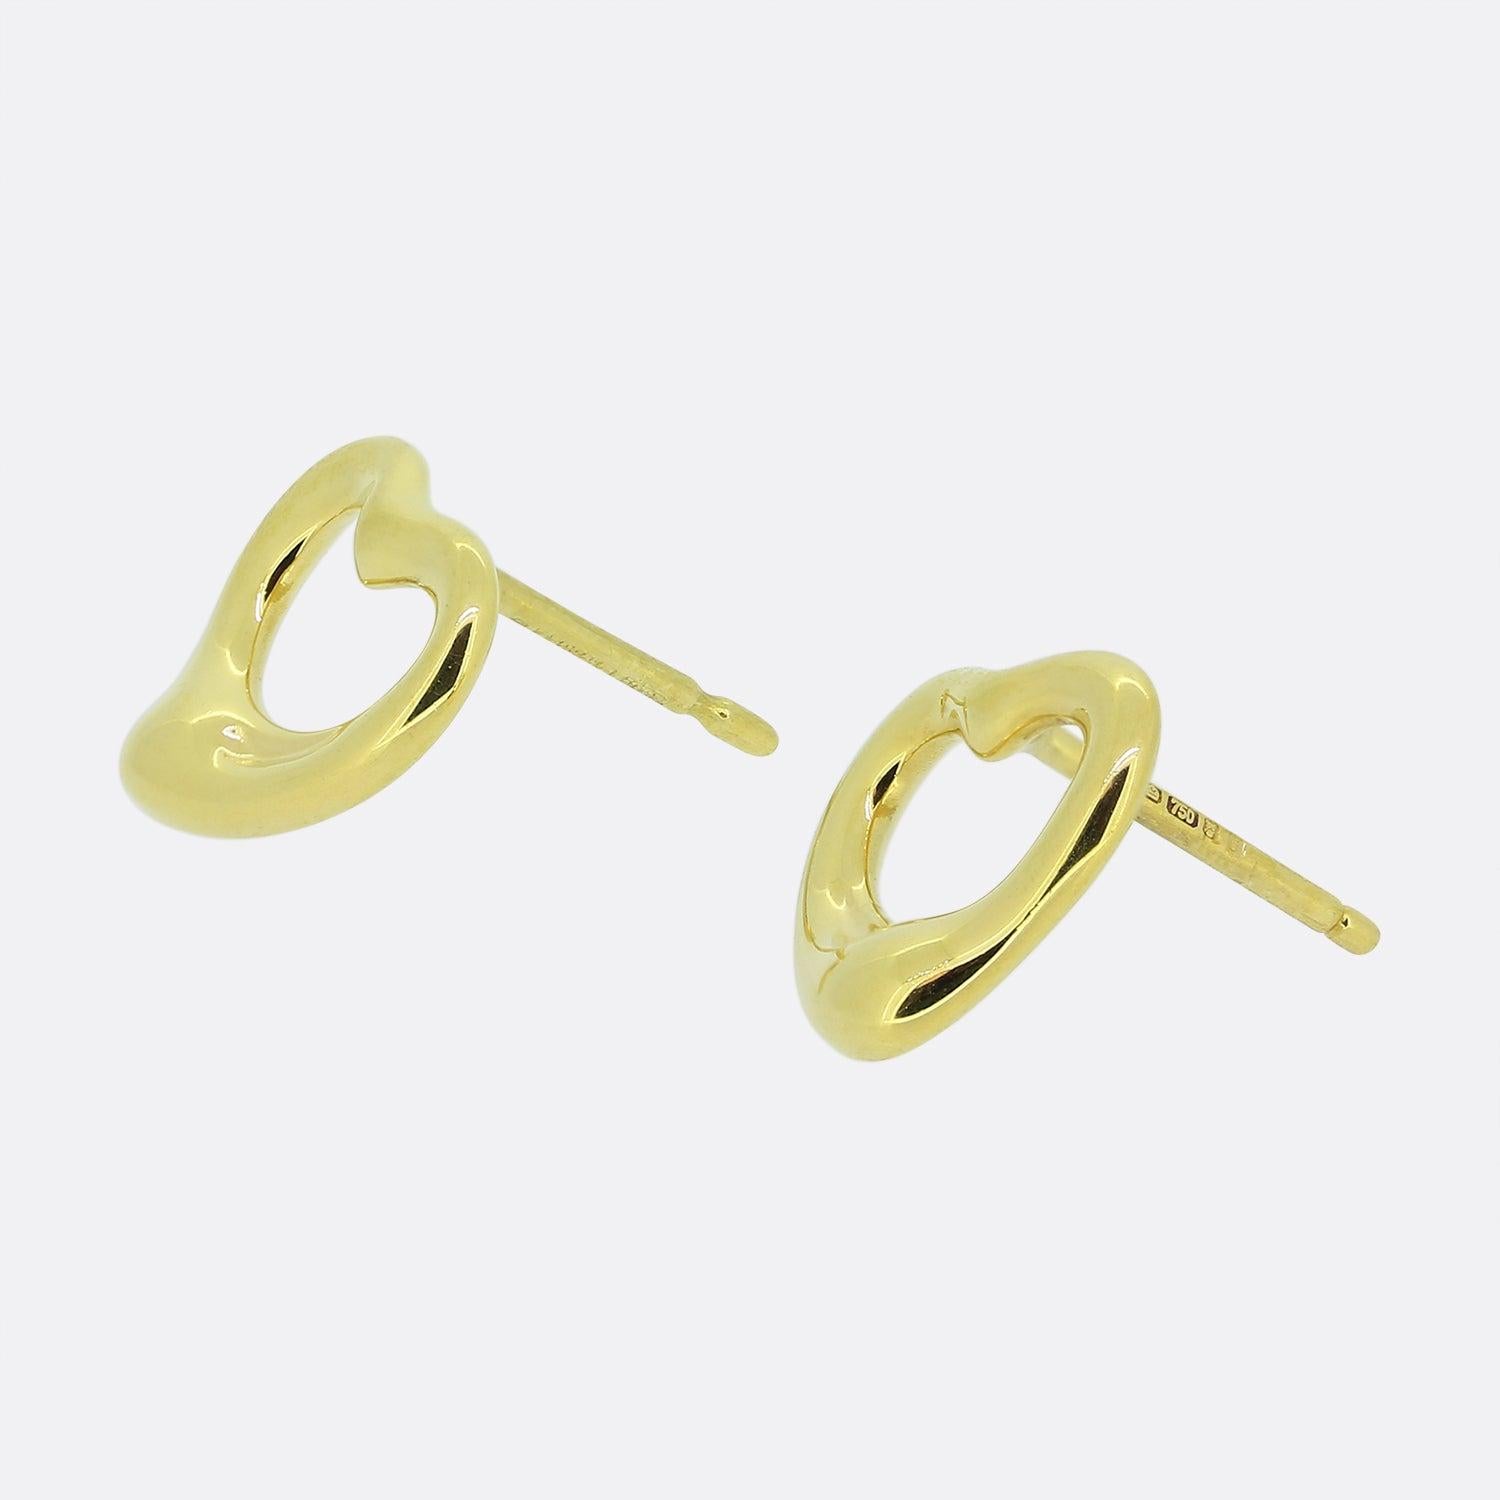 Here we have a pair of 18ct yellow gold earrings from the world renowned jewellery designer, Tiffany & Co. These earrings form part of an Elsa Peretti collection and showcase her iconic open heart design.
These are the slightly larger 11mm model.